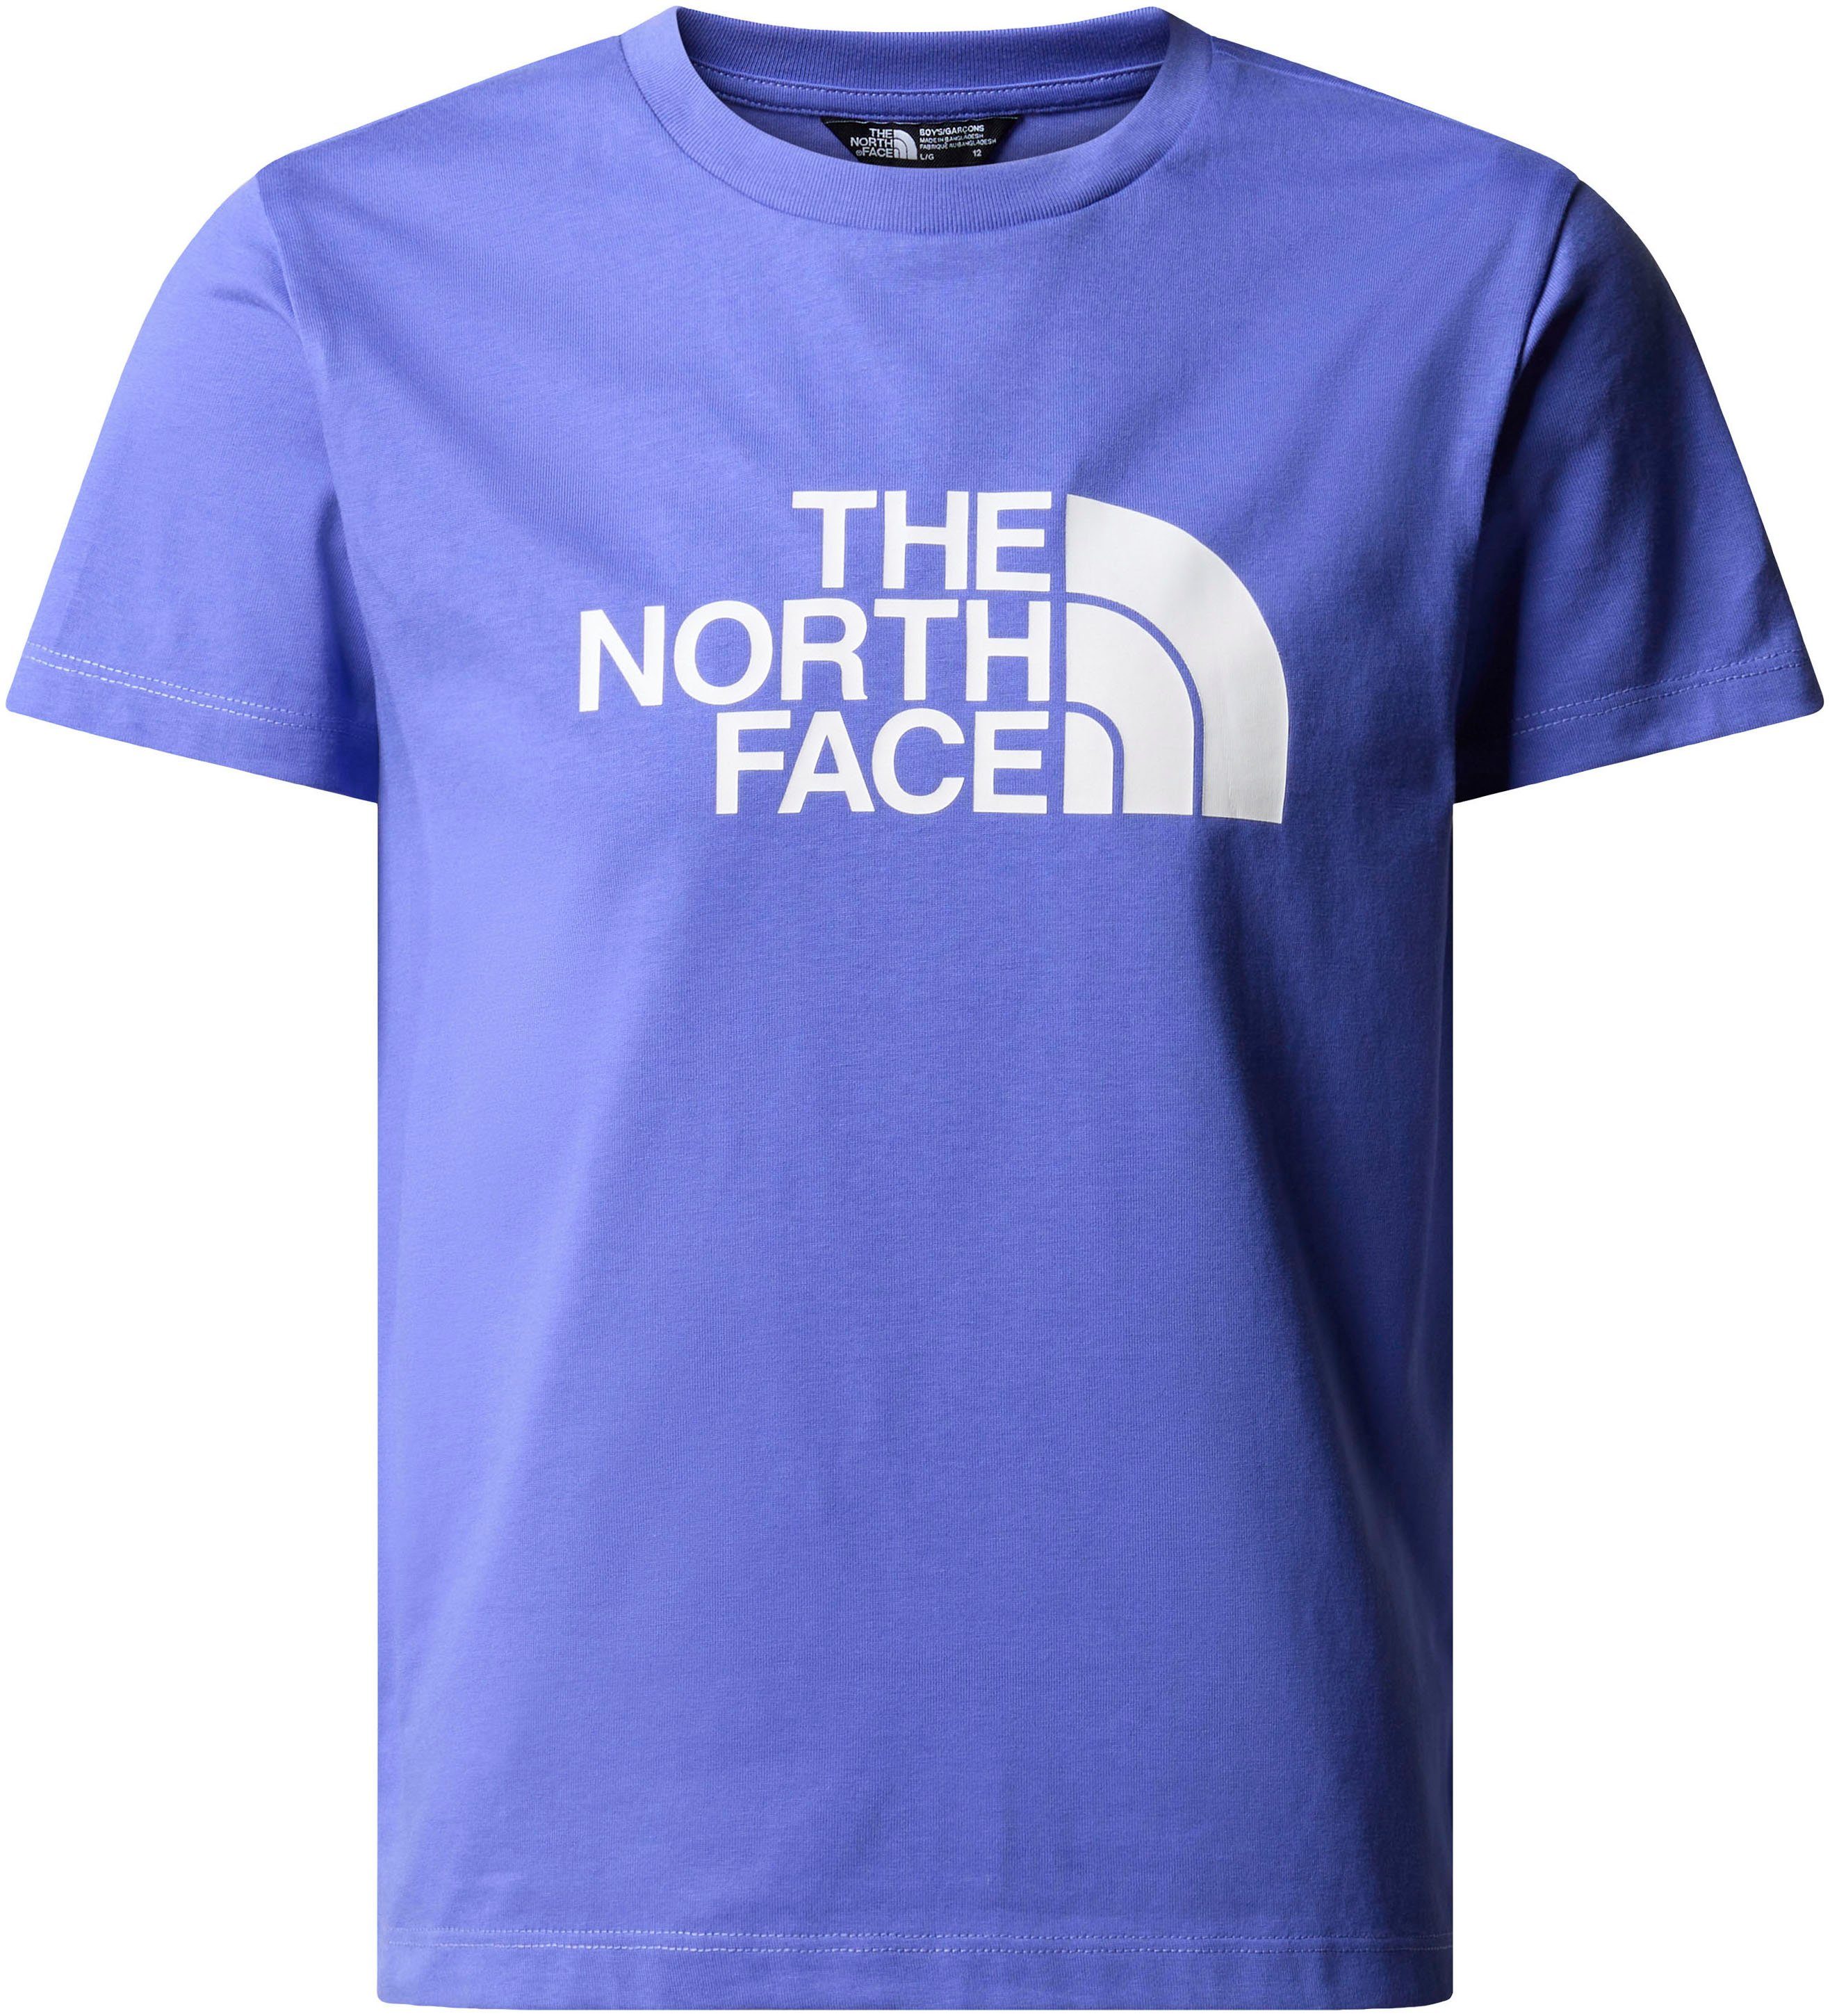 The North Face T-shirt Easy blauw wit Katoen Ronde hals 158 164